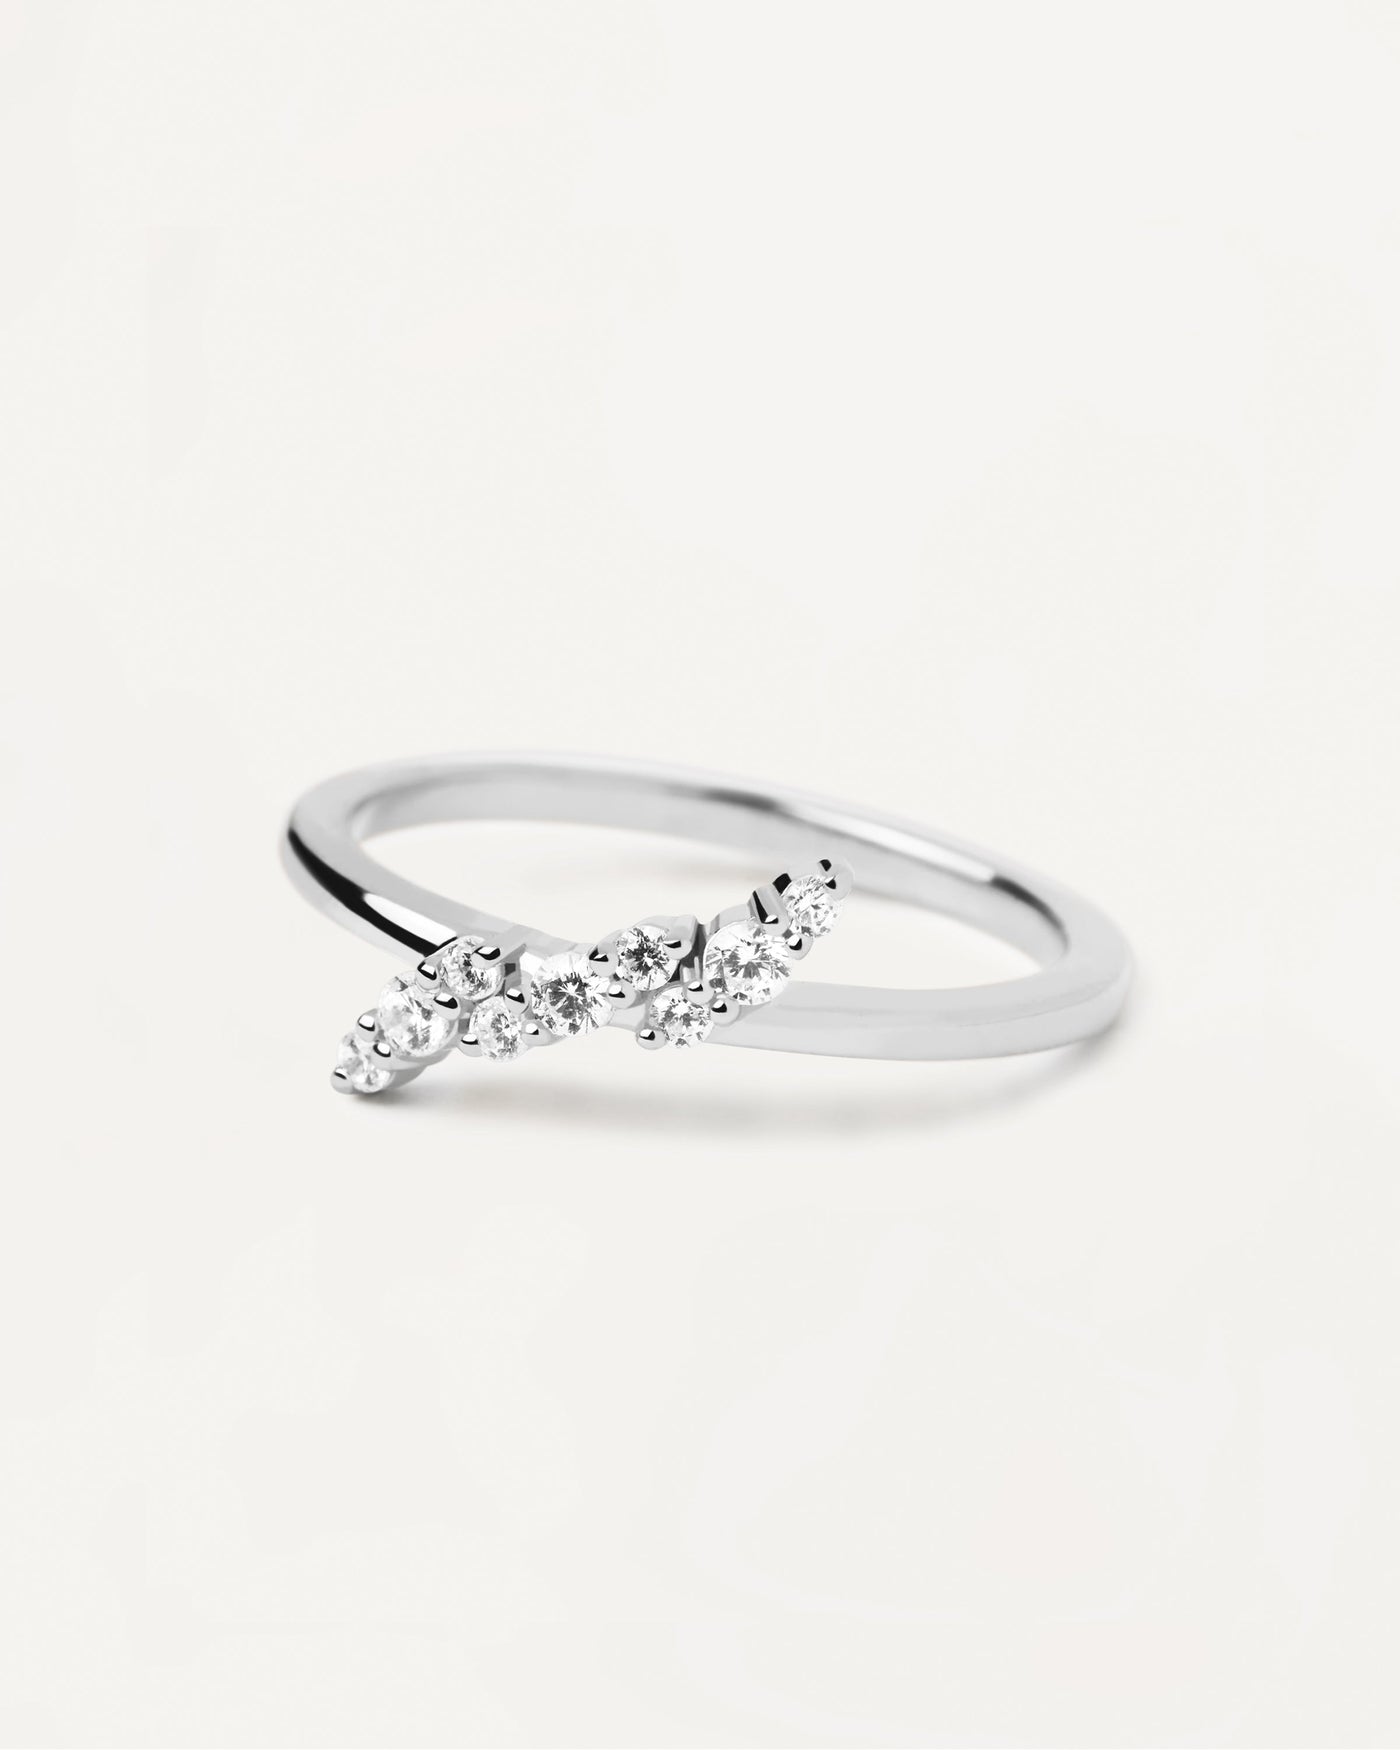 2023 Selection | Natura Silver Ring. Basic sterling silver ring with small white crystals. Get the latest arrival from PDPAOLA. Place your order safely and get this Best Seller. Free Shipping.